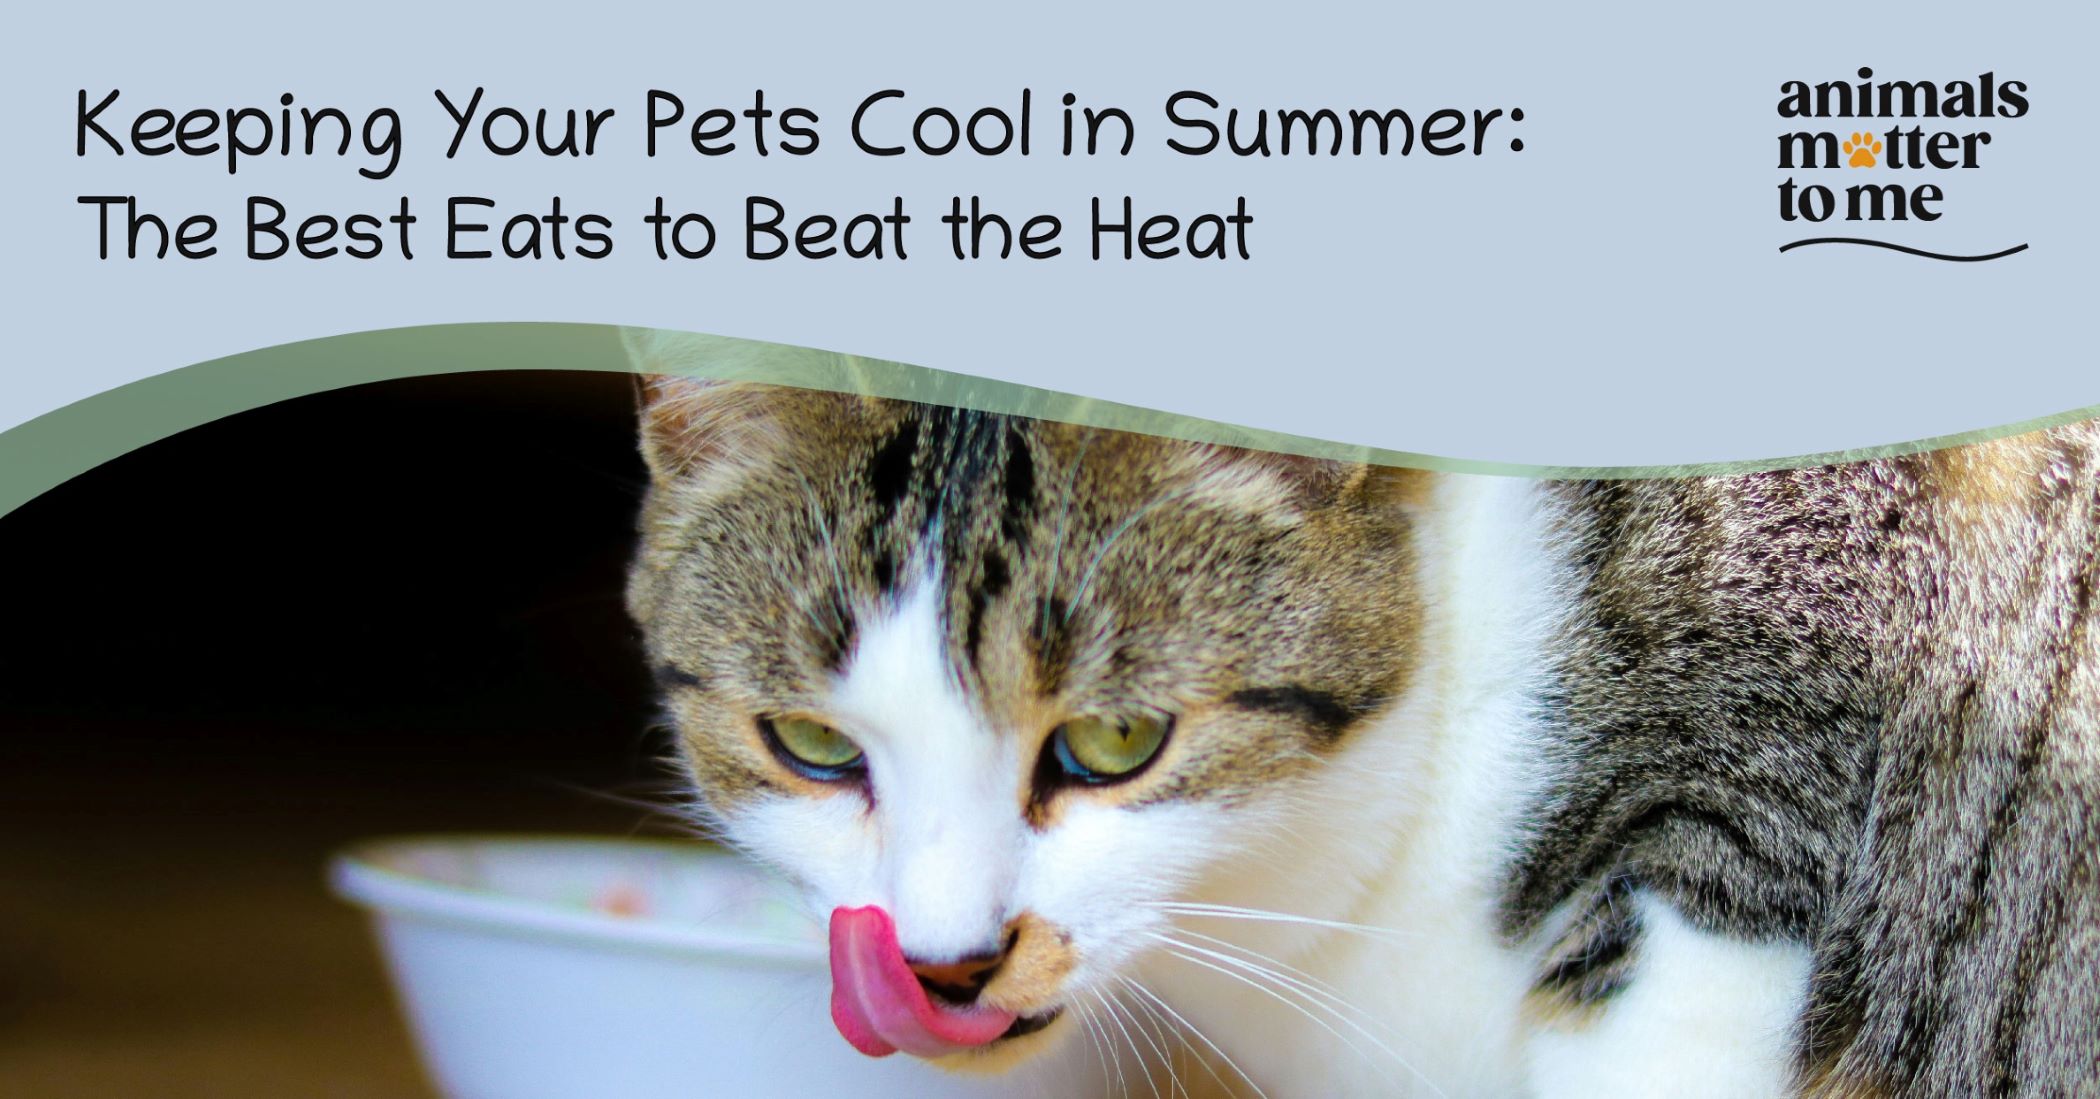 Keeping Your Pets Cool in Summer: The Best Eats to Beat the Heat